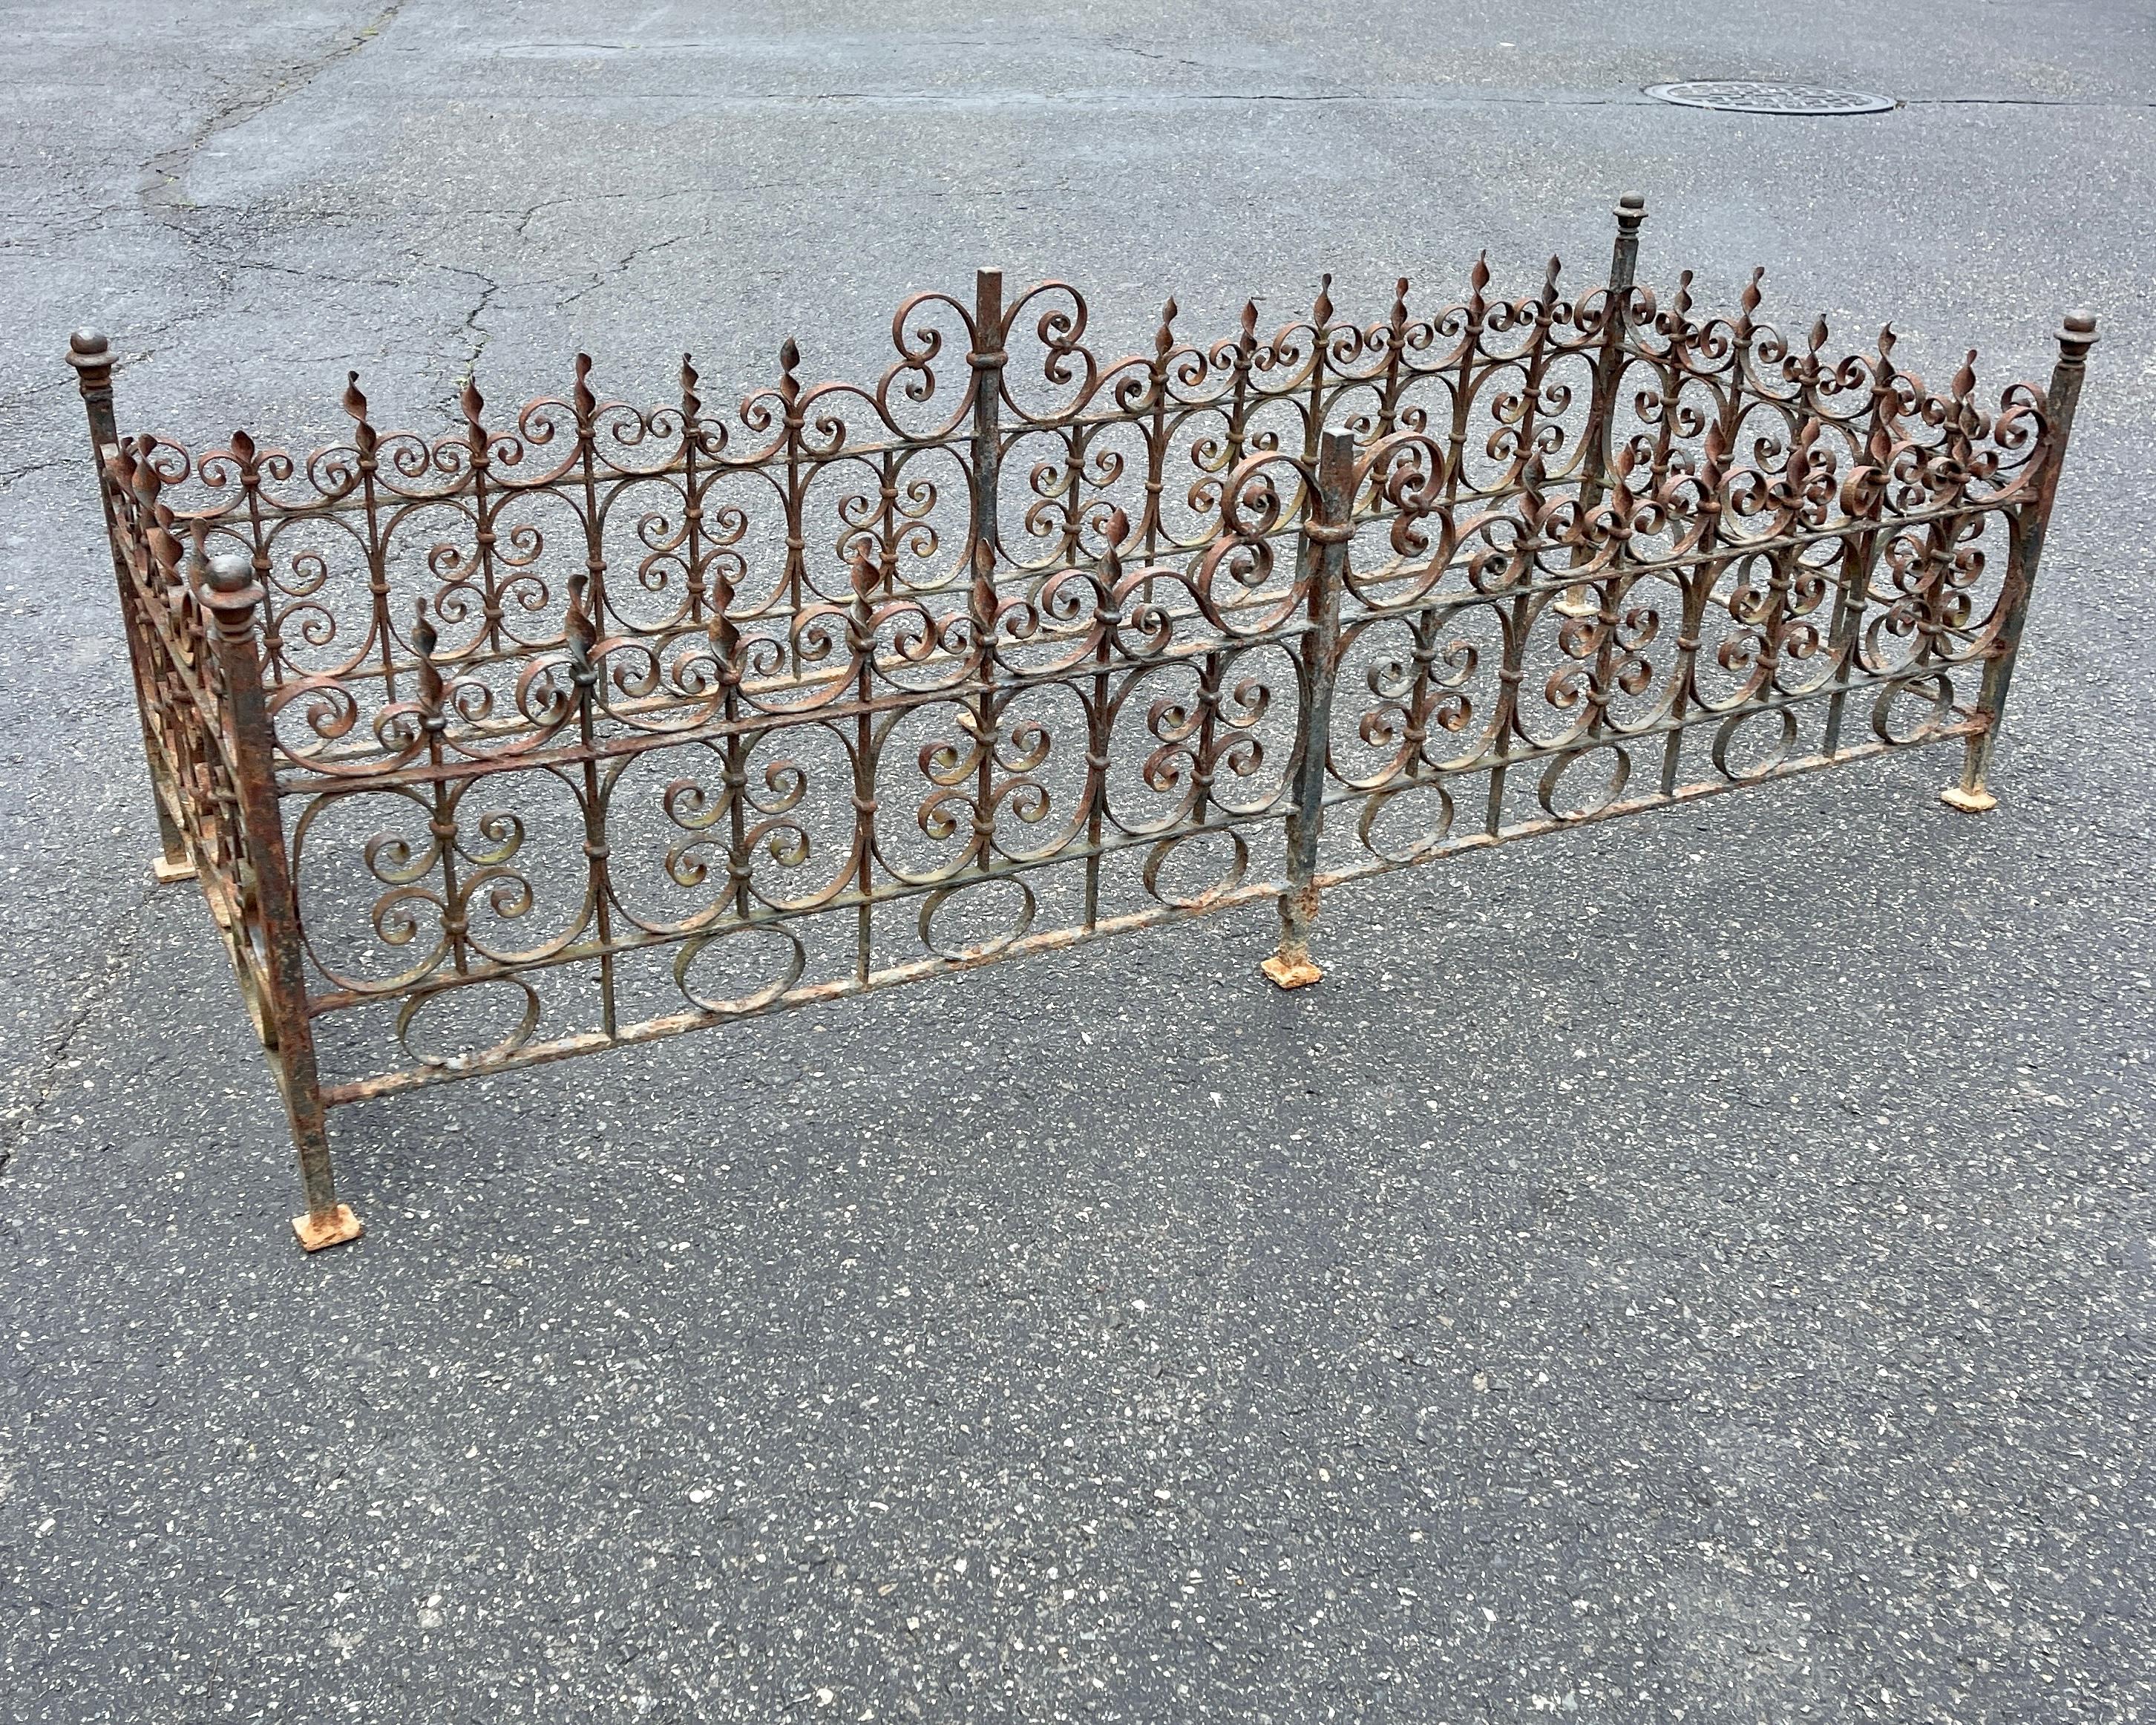 Rectangular wrought iron Architectural Element
This vintage wrought iron fence element is the perfect patio cocktail table base and has an amazing unbeatable patina.

A 1/2 inch tempered rectangular glass top, measuring 68 by 29 inches can be